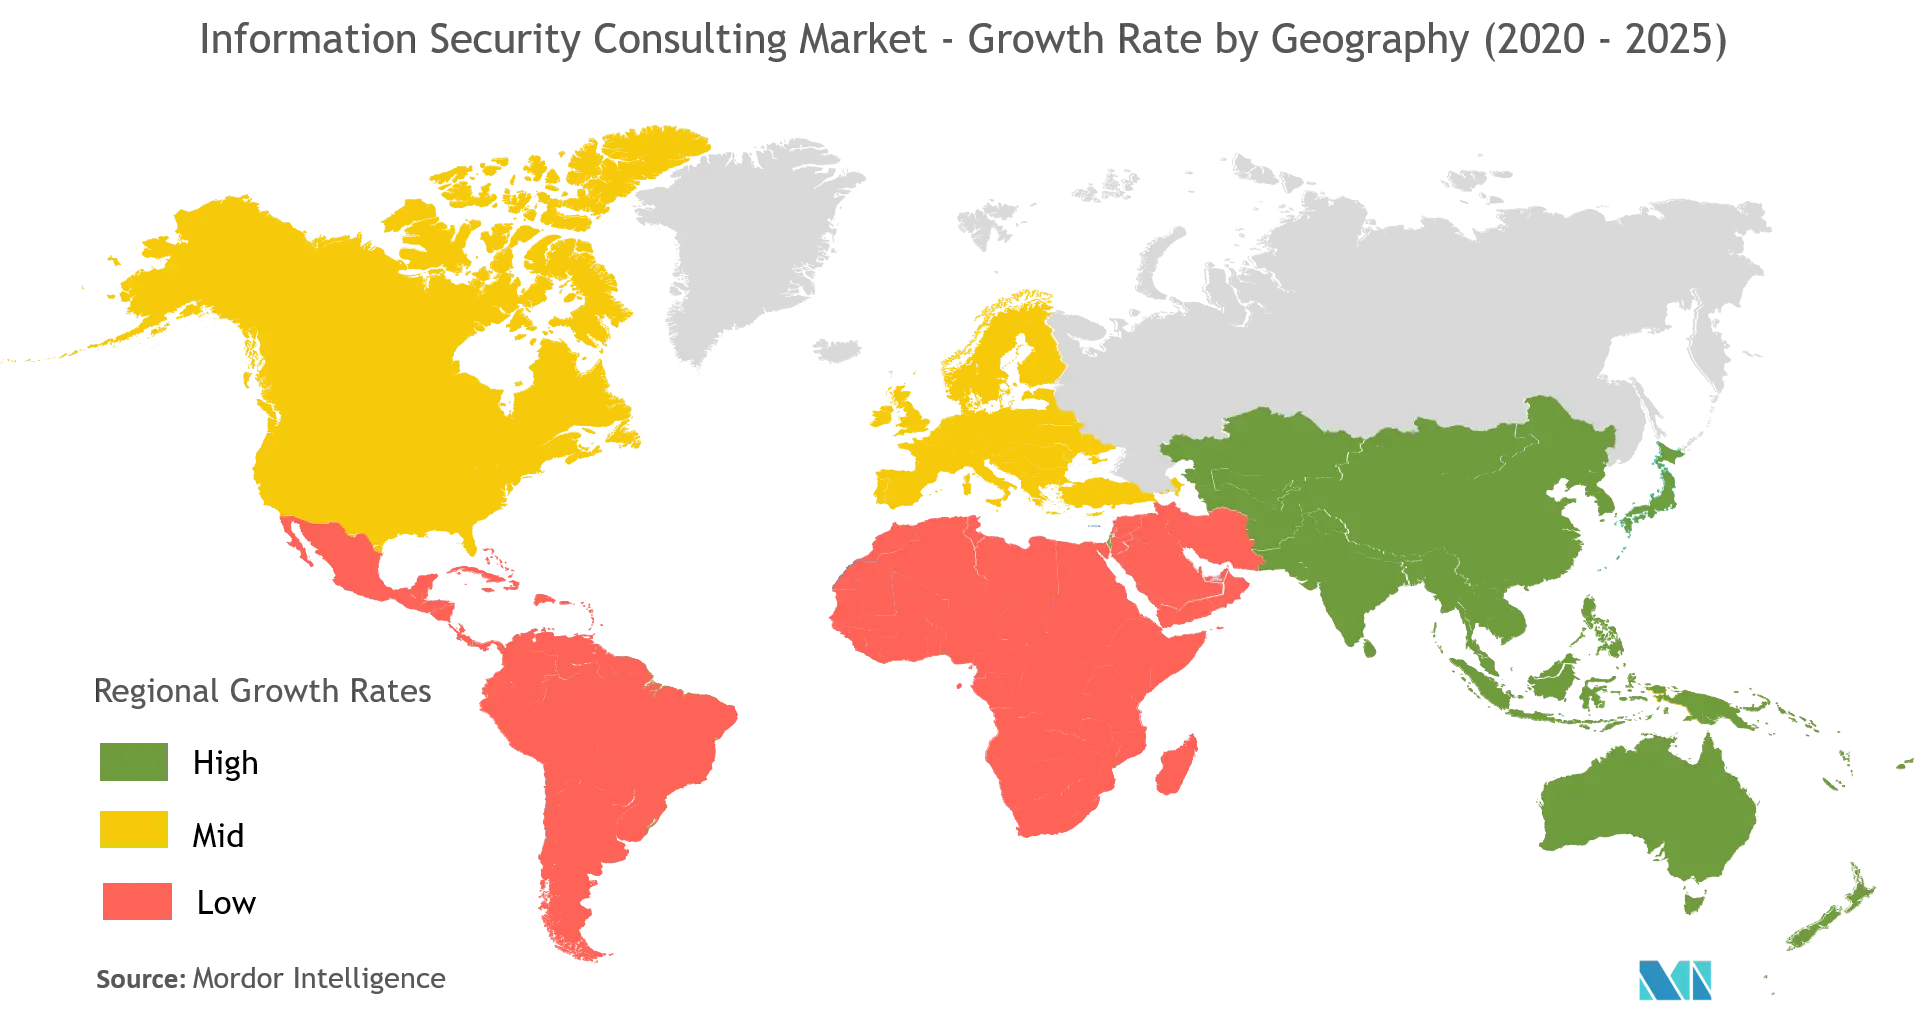 Information Security Consulting Market Analysis